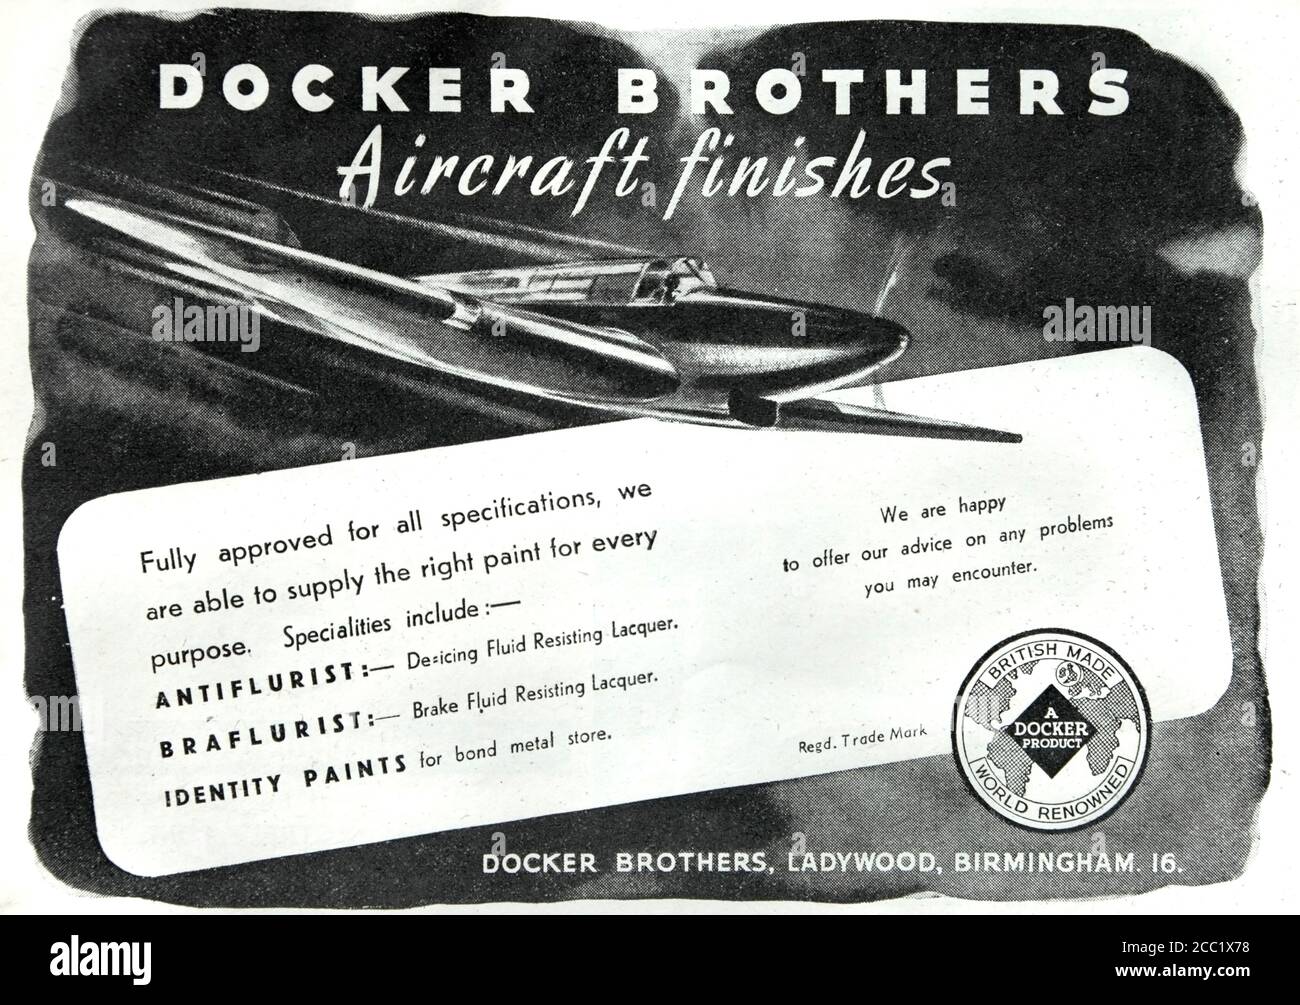 Vintage 1942 advertisement for aircraft finishes made by the Docker Brothers company of Birmingham, UK. Stock Photo